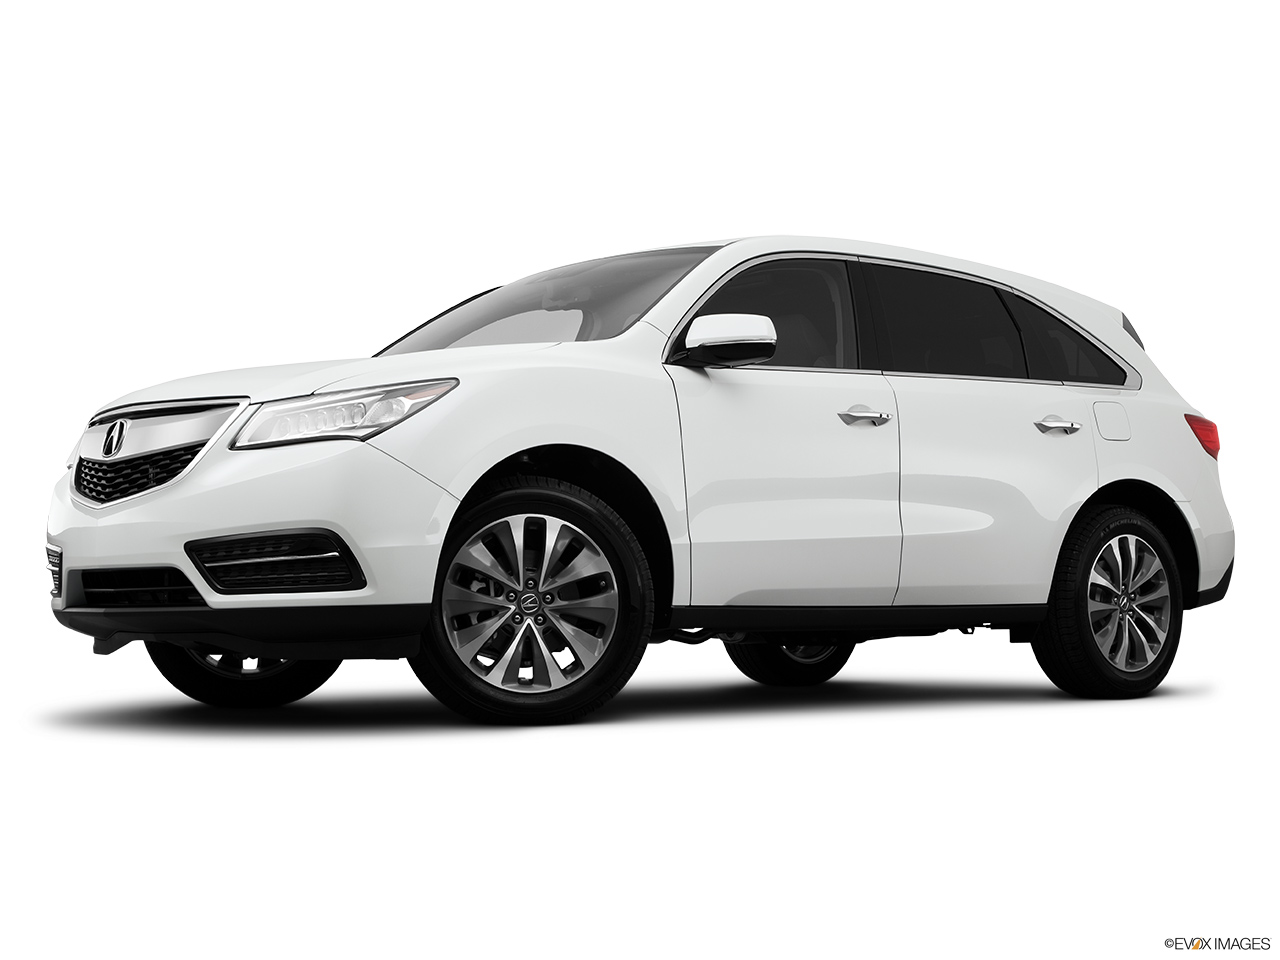 2014 Acura MDX SH-AWD Low/wide front 5/8. 